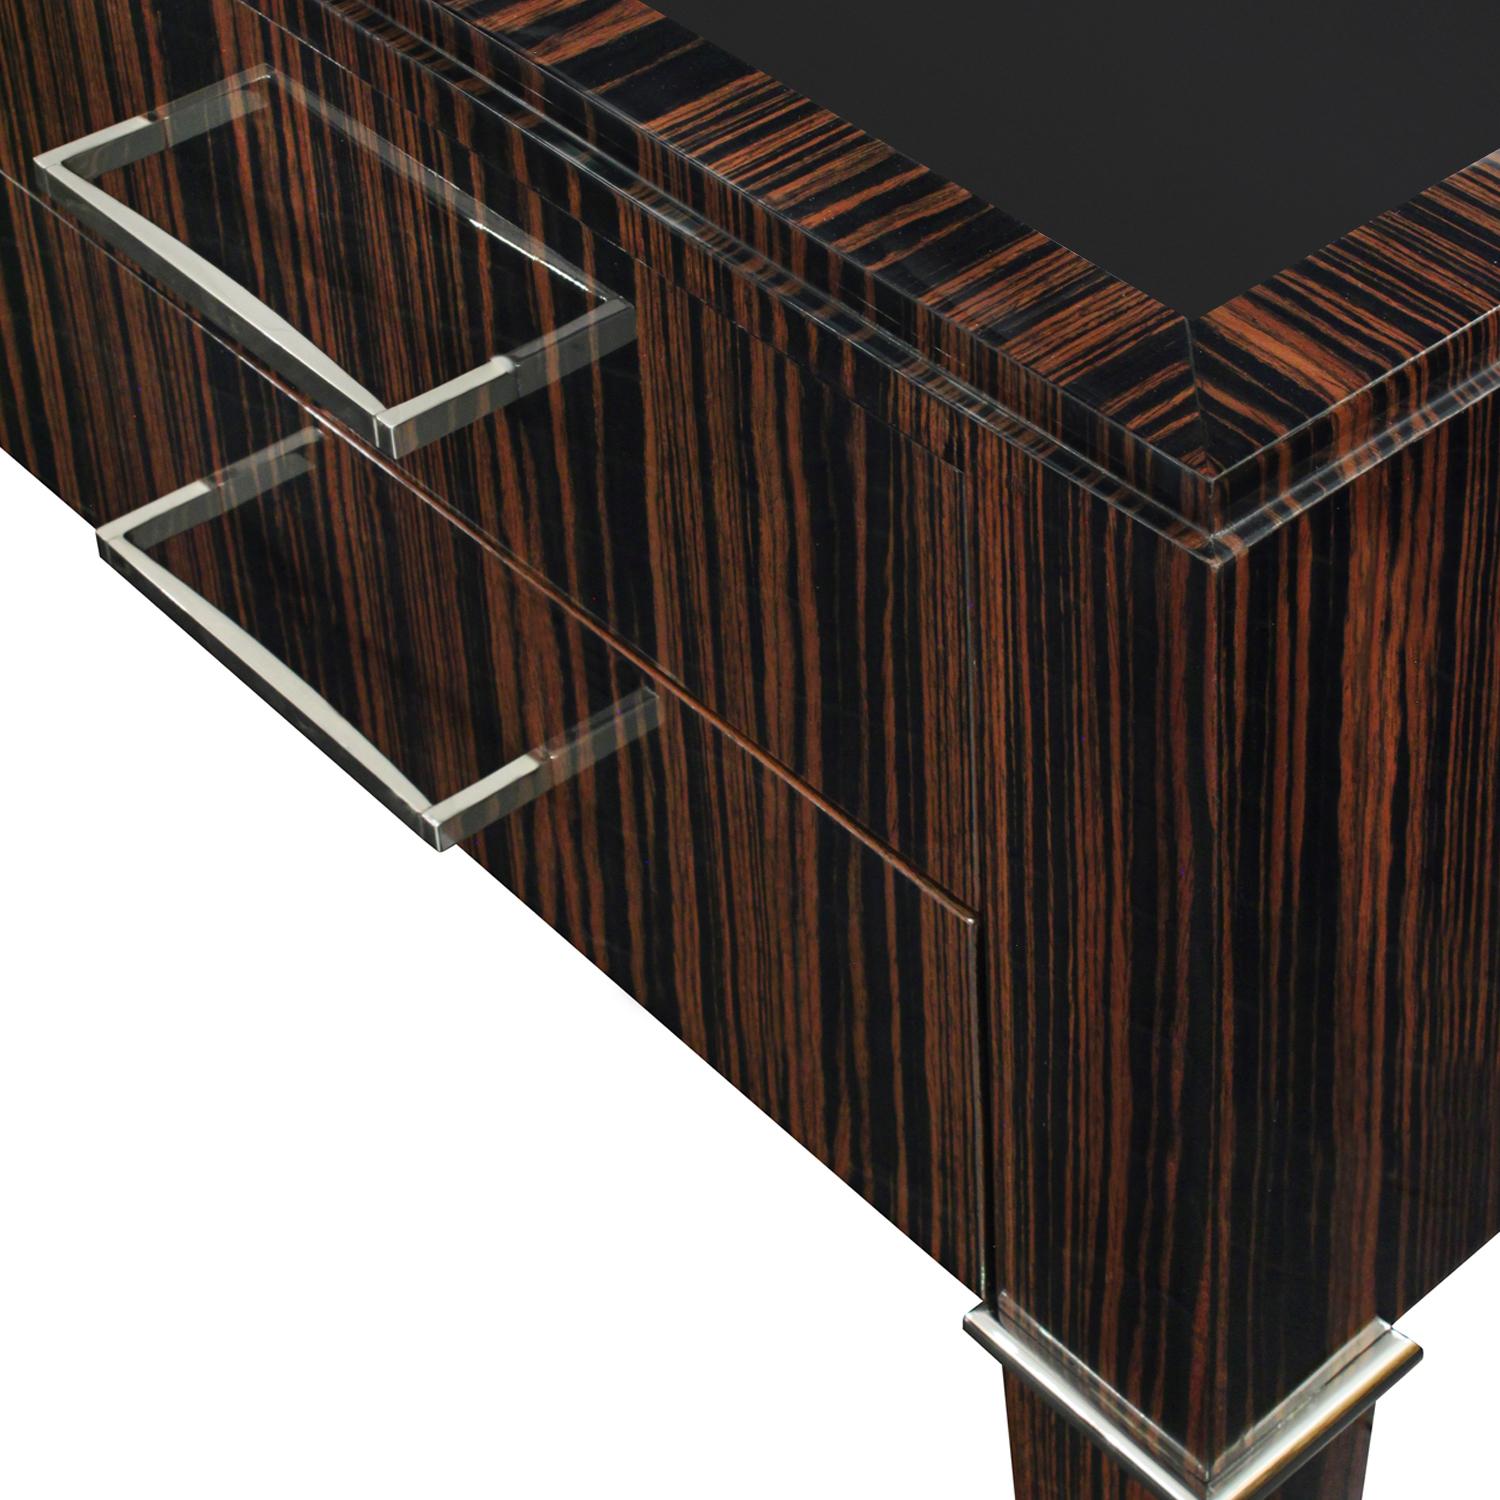 Hand-Crafted Lobel Originals Desk in Macassar Ebony with Leather Top, Made to Order For Sale